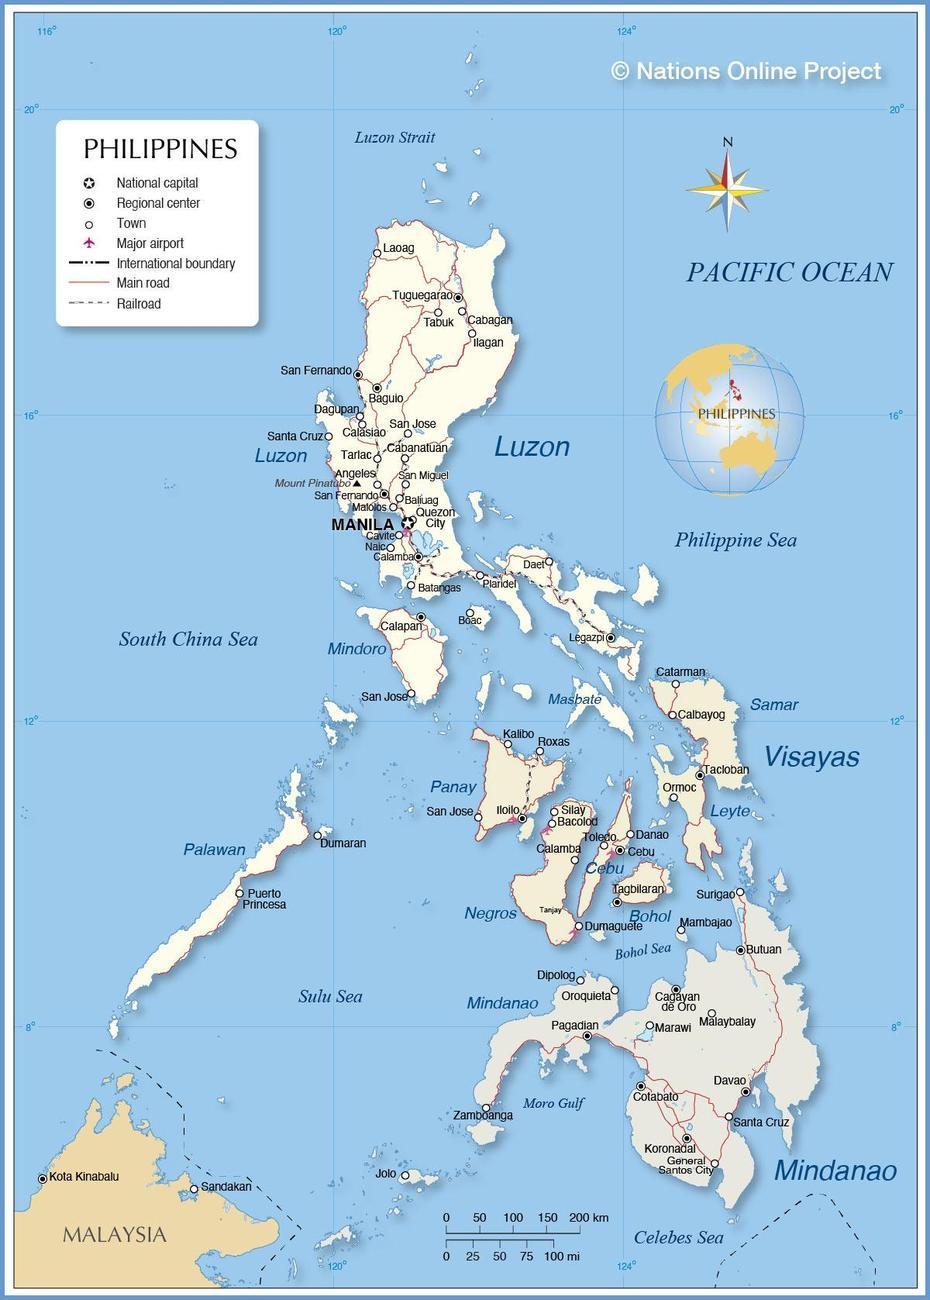 Biological Health Threat  Dengue Fever Outbreak: Philippines | Head Space, Pandami, Philippines, Life During Pandemic In The Philippines, Pandemic Art